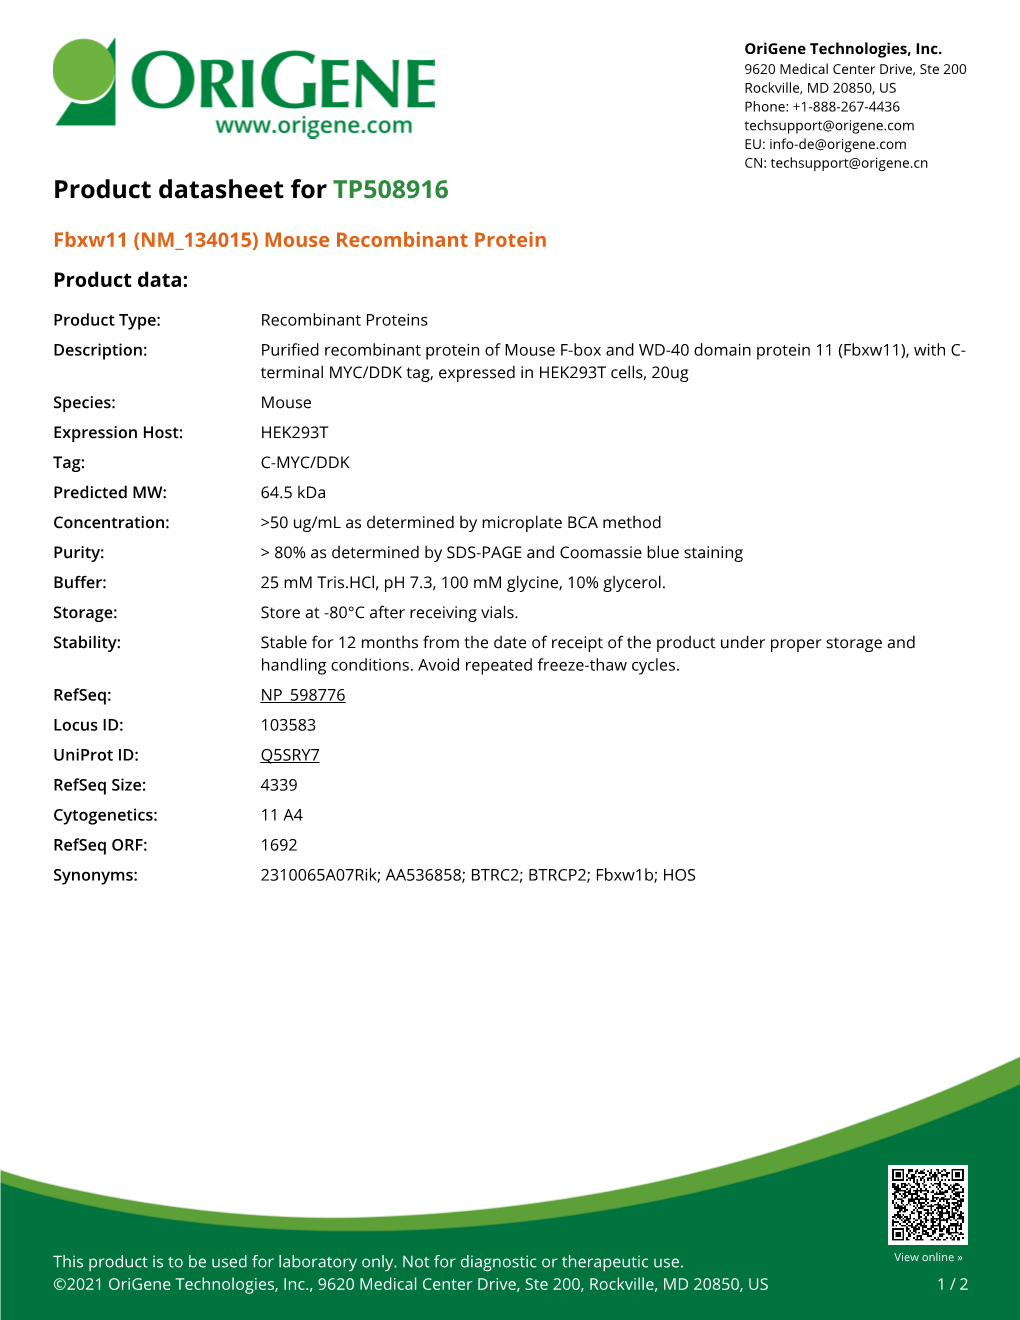 Fbxw11 (NM 134015) Mouse Recombinant Protein Product Data